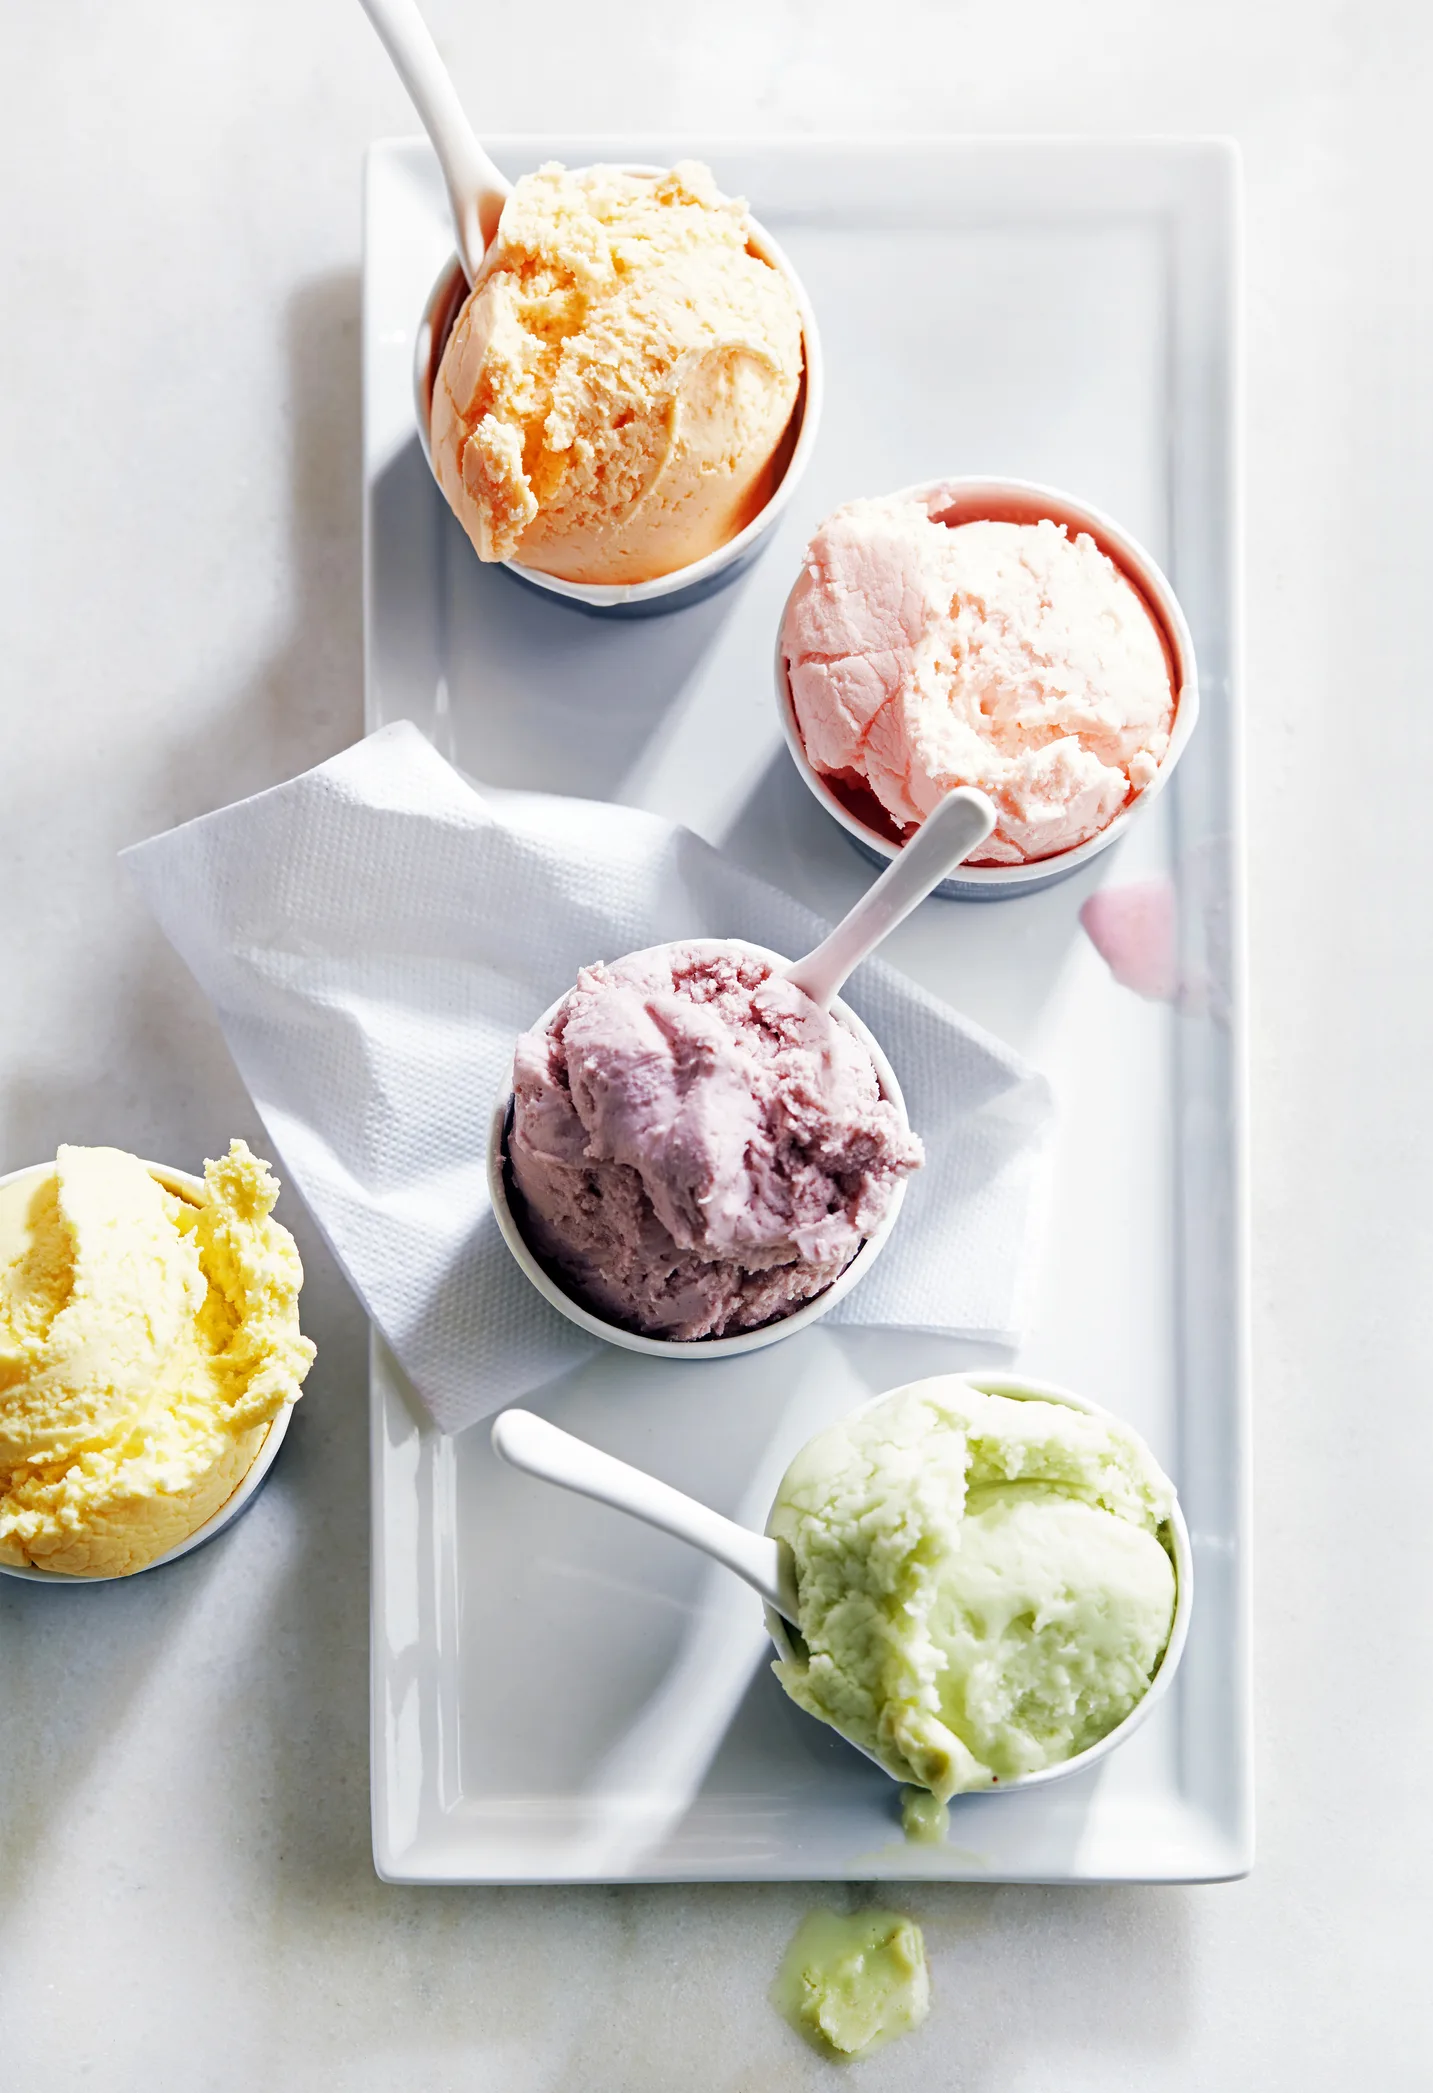 31 ice cream flavors, ranked from worst to best